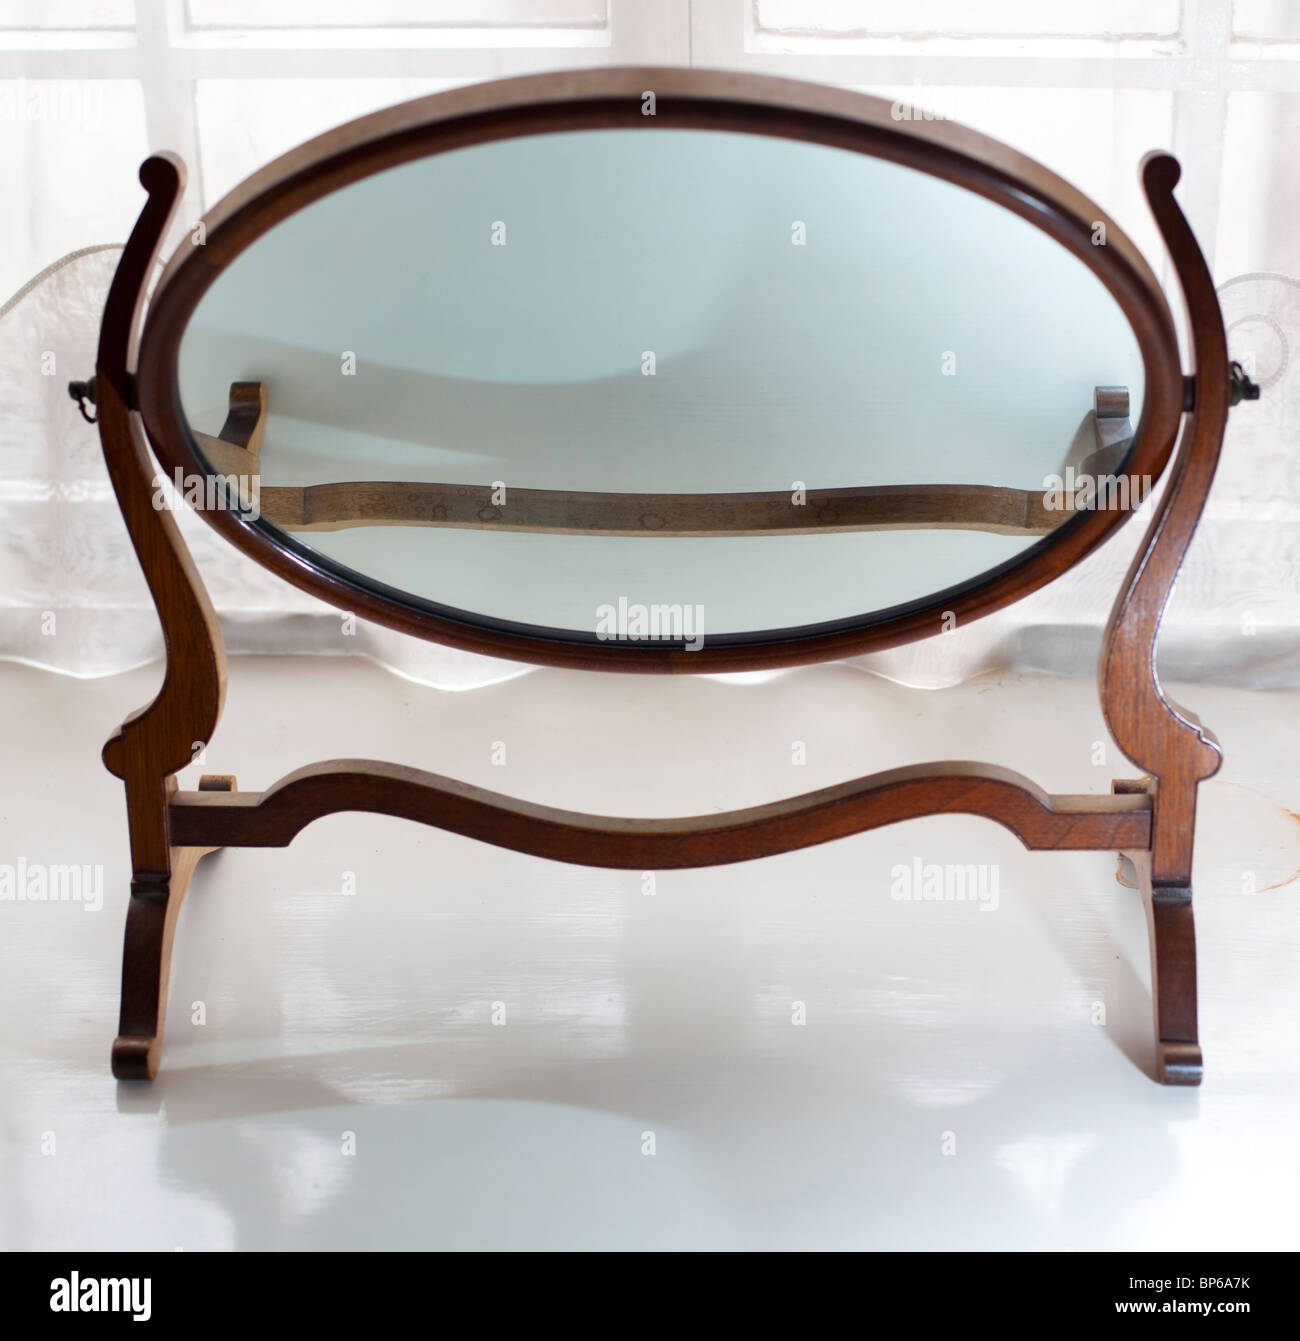 Oval mirror in wooden frame Stock Photo